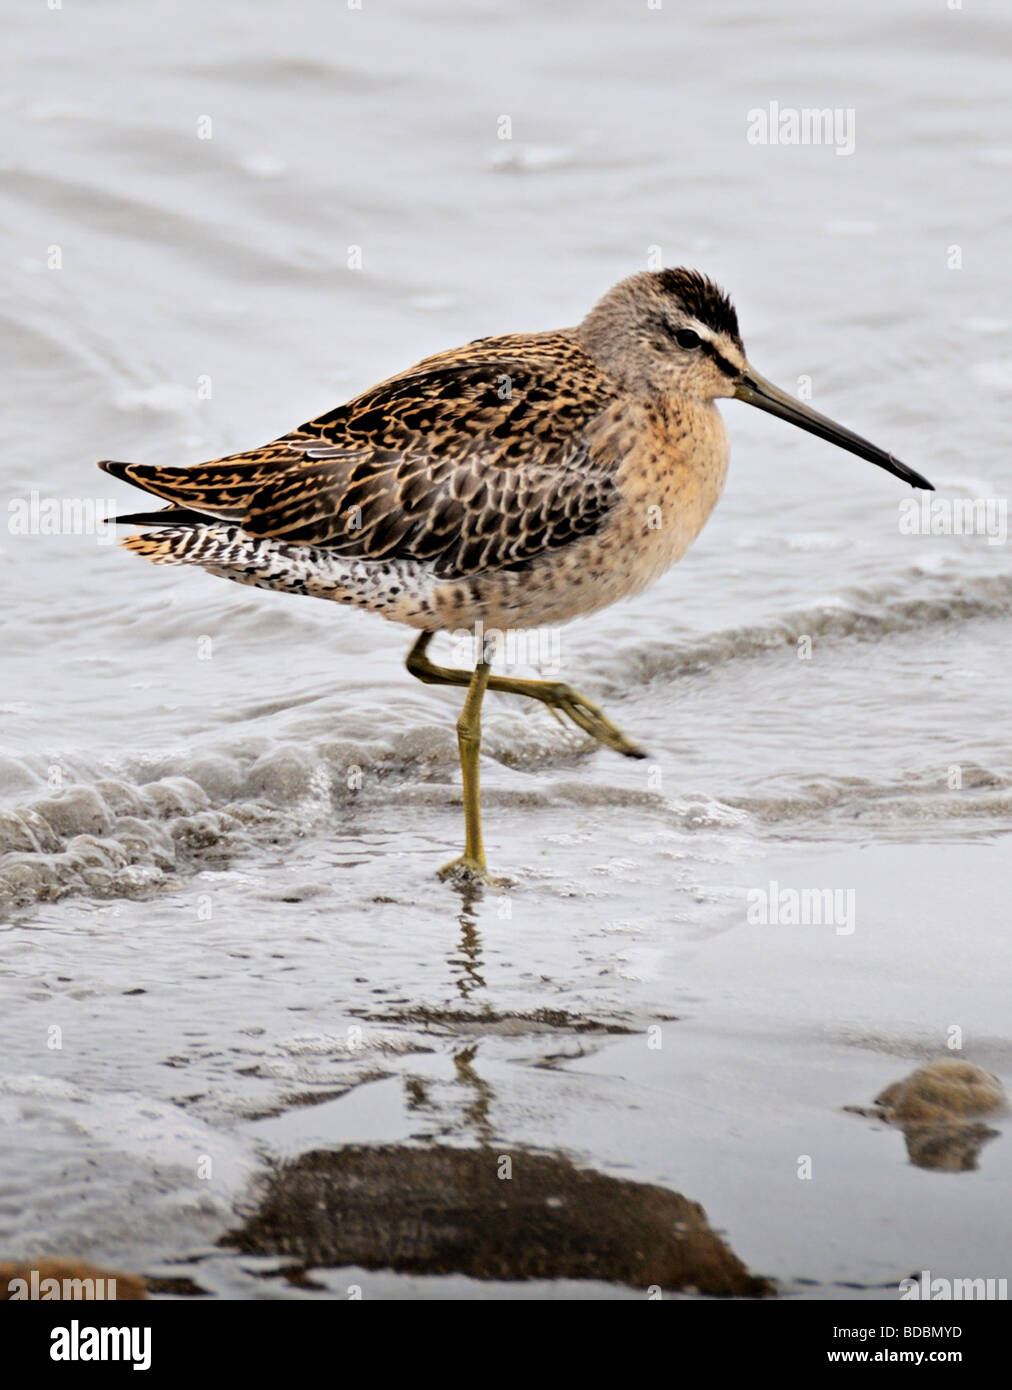 A Short-billed Dowitcher bird  (Limnodromus griseus)  seen here standing on the shore Stock Photo